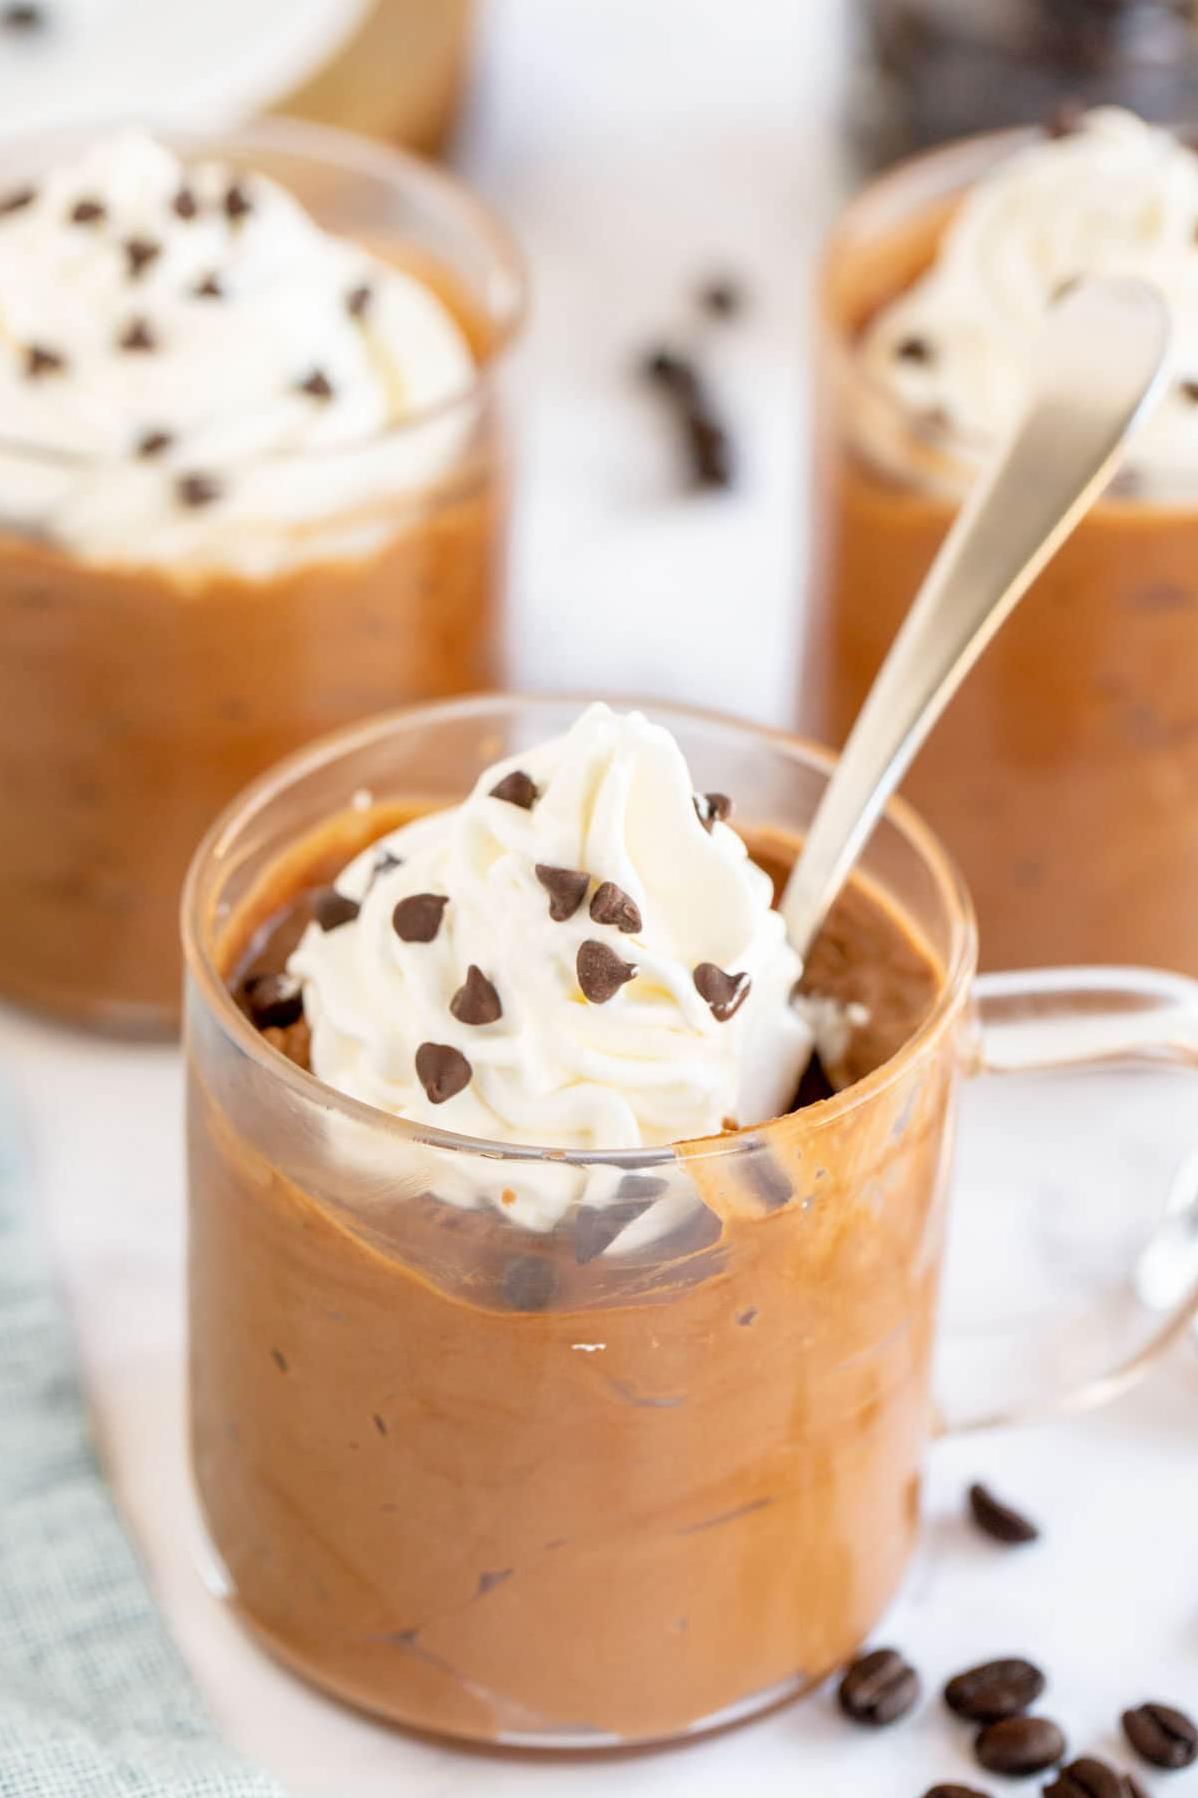  This coffee and cream mousse is the perfect pick-me-up dessert.